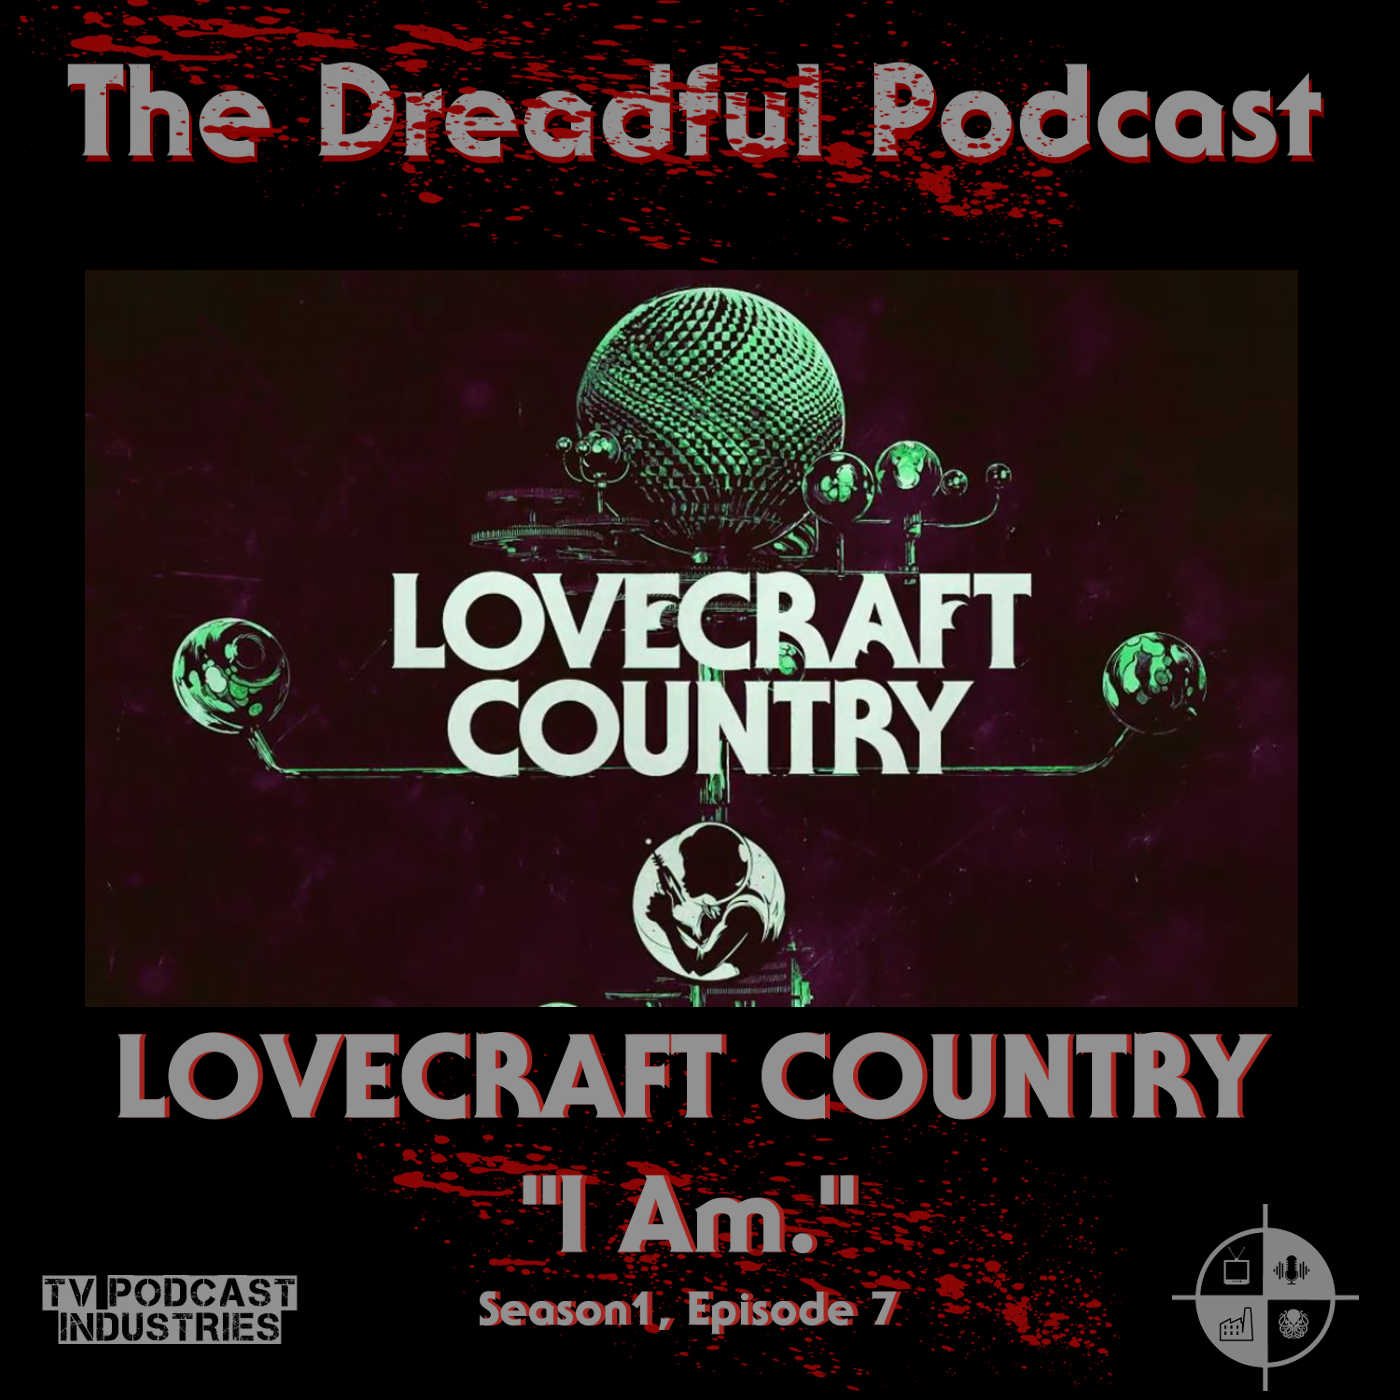 Lovecraft Country Episode 7 “I Am.” Podcast